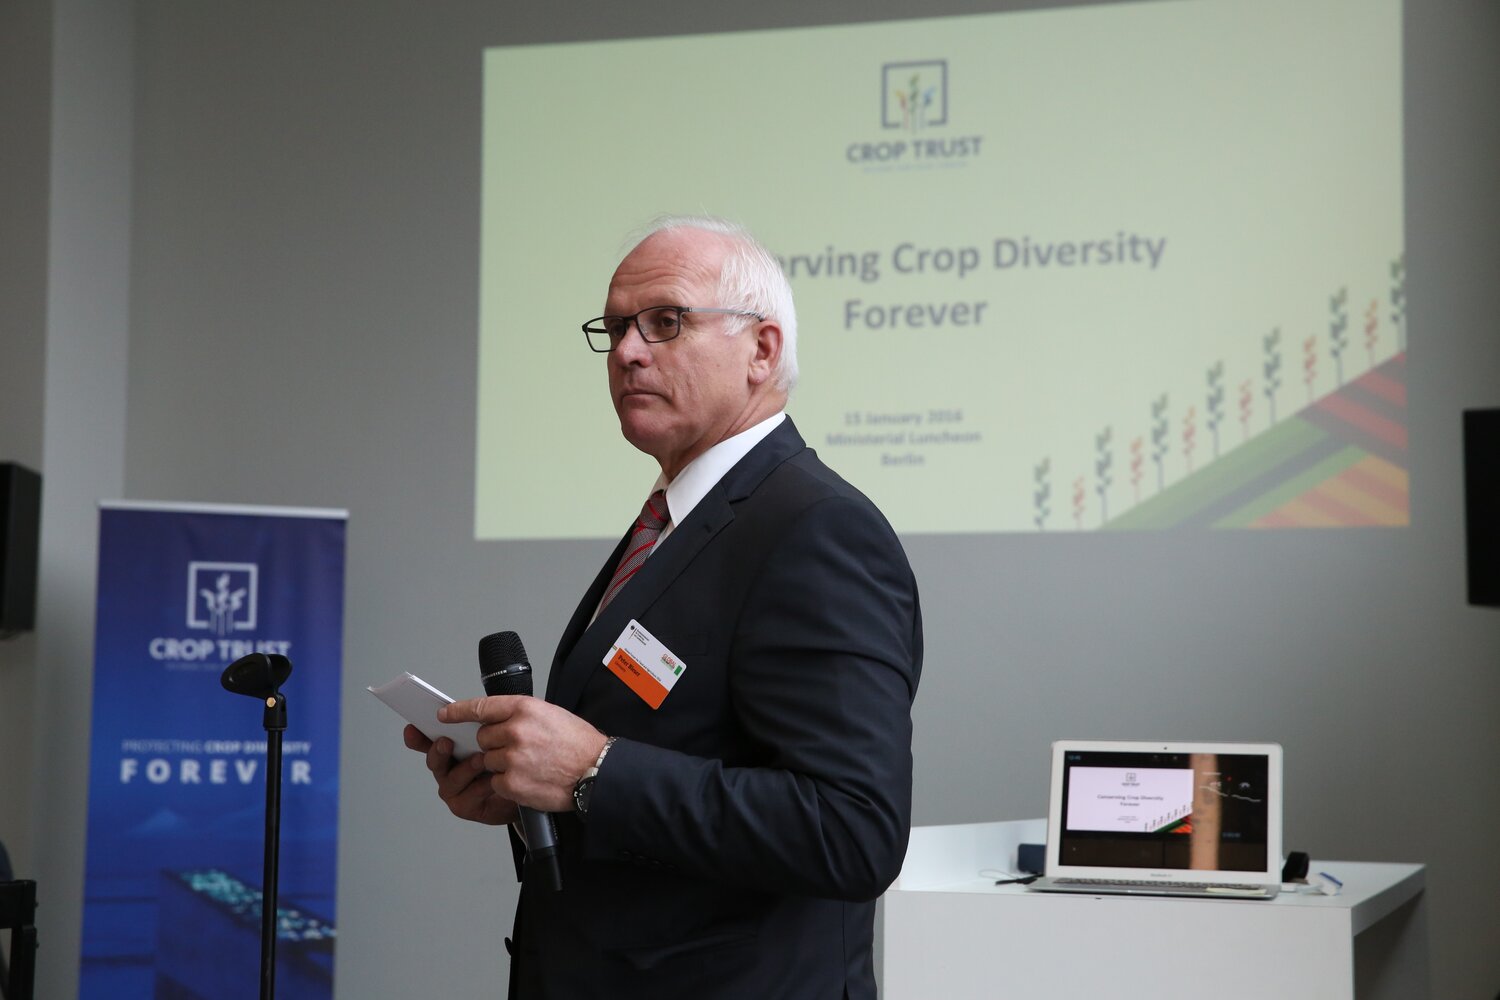 Parliamentary State Secretary, Peter Bleser, gives welcoming remarks and highlights the importance of crop diversity 